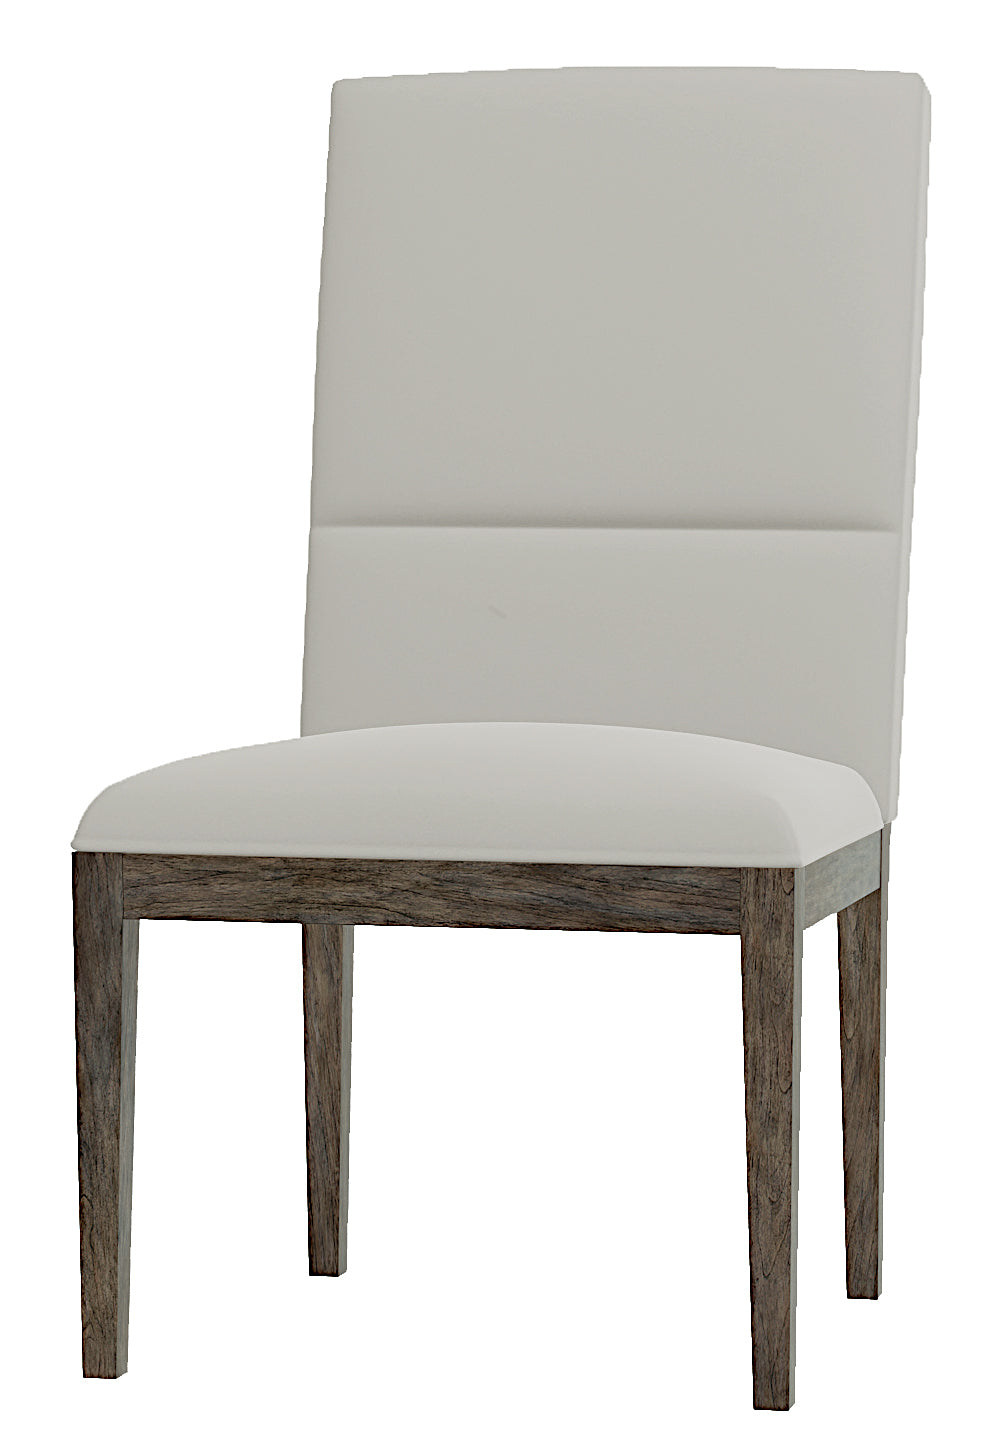 Hekman 25823 Arlington Heights 22.5in. x 27.75in. x 40in. Dining Side Chair